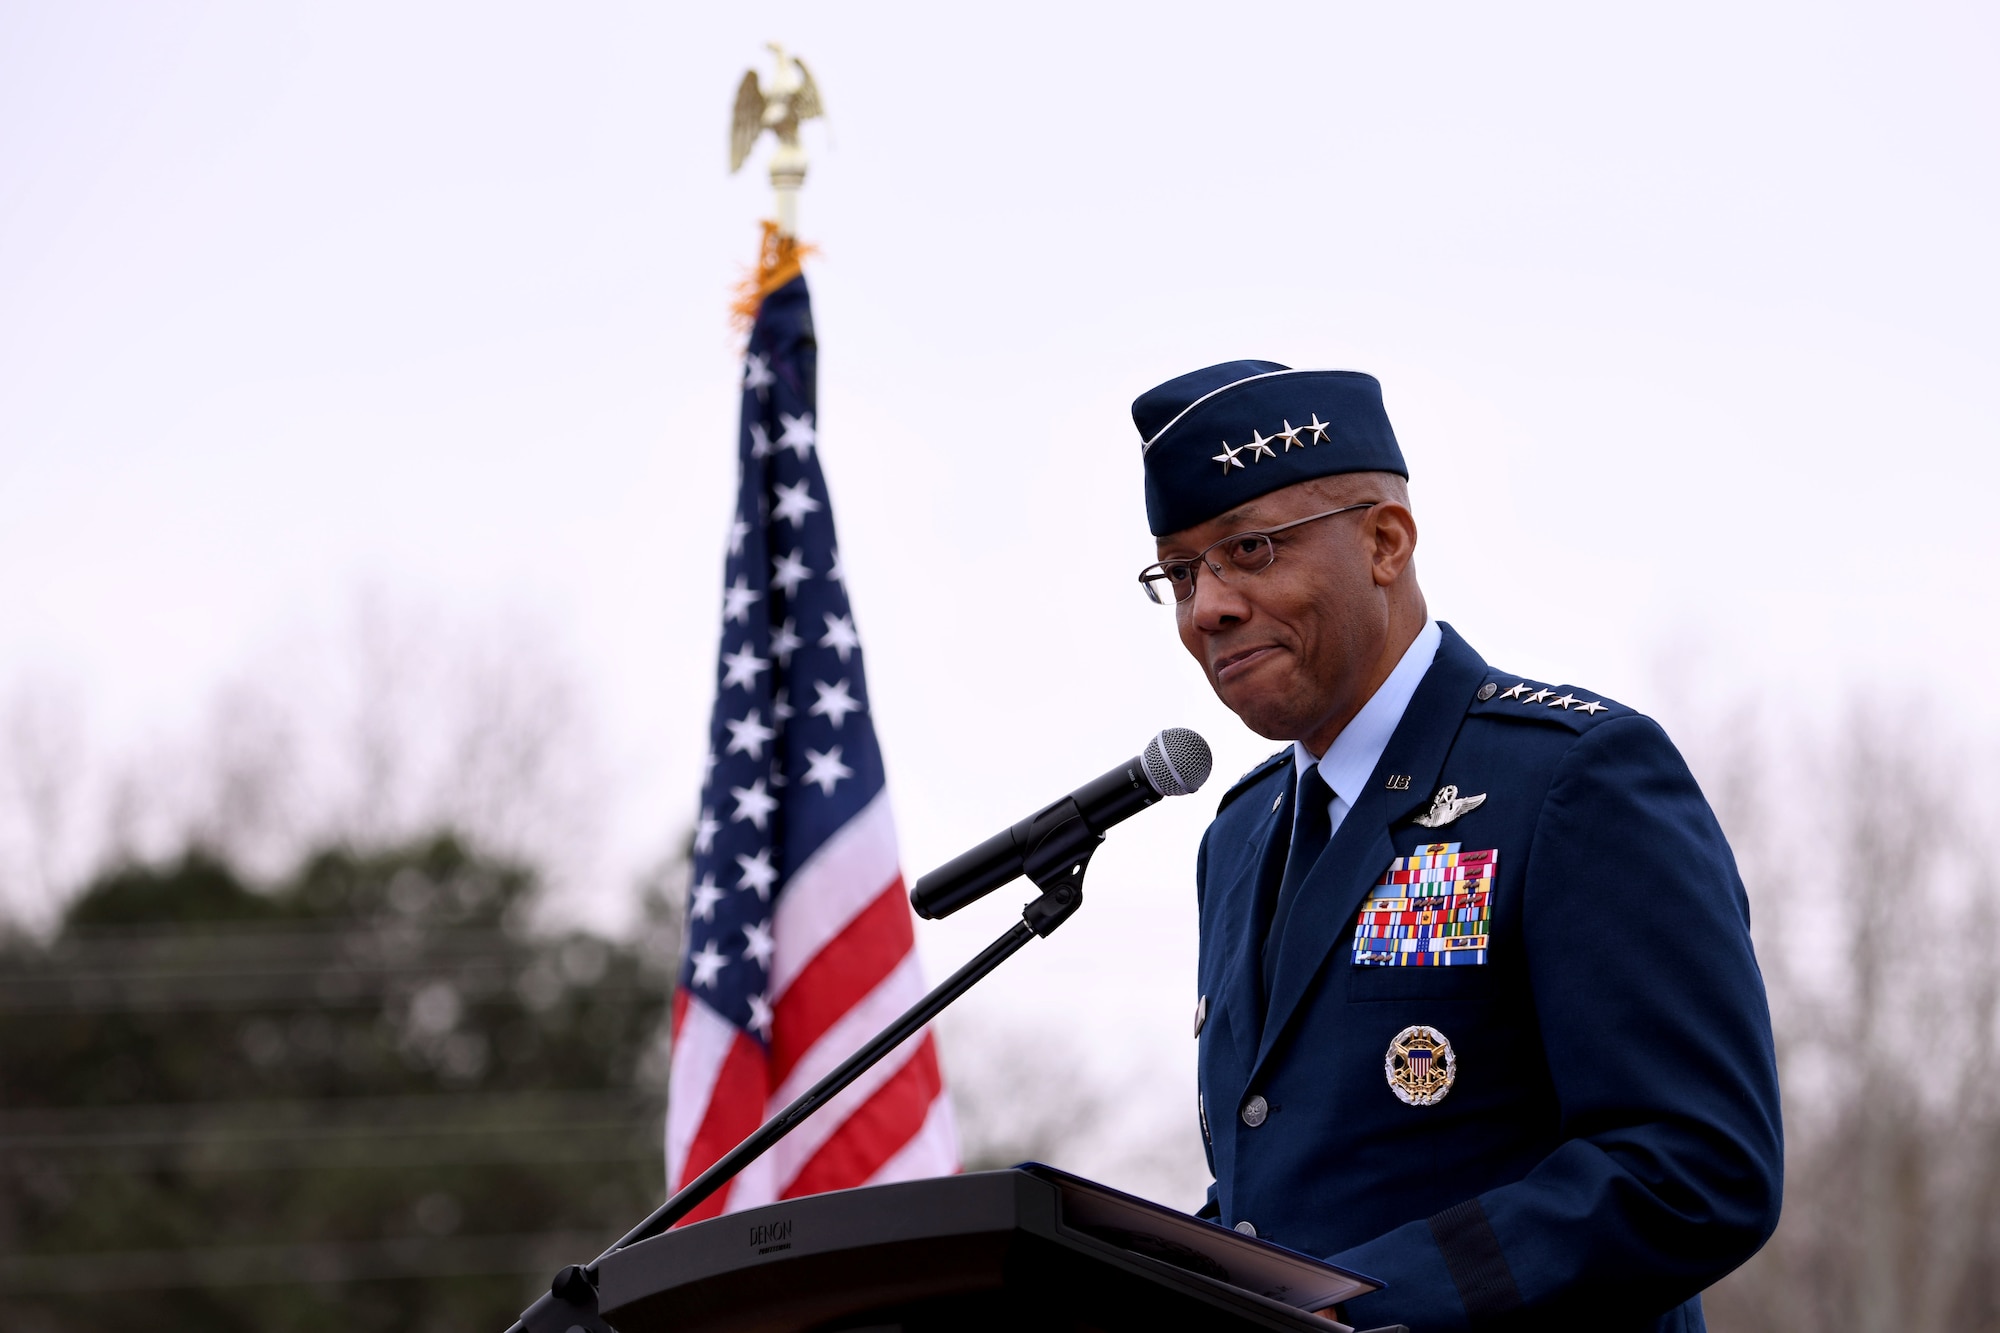 Chairman of the Joint Chiefs of Staff Gen. CQ Brown Jr. speaks during a Tuskegee Airmen Monument dedication ceremony at Veterans Park in Sumter, S.C., Feb. 9, 2024. Brown assumed the position of Chairman of the Joint Chiefs of Staff in October 2023, becoming the 21st service member to hold the title. (U.S. Air Force photo by Staff Sgt. Kelsey Owen)